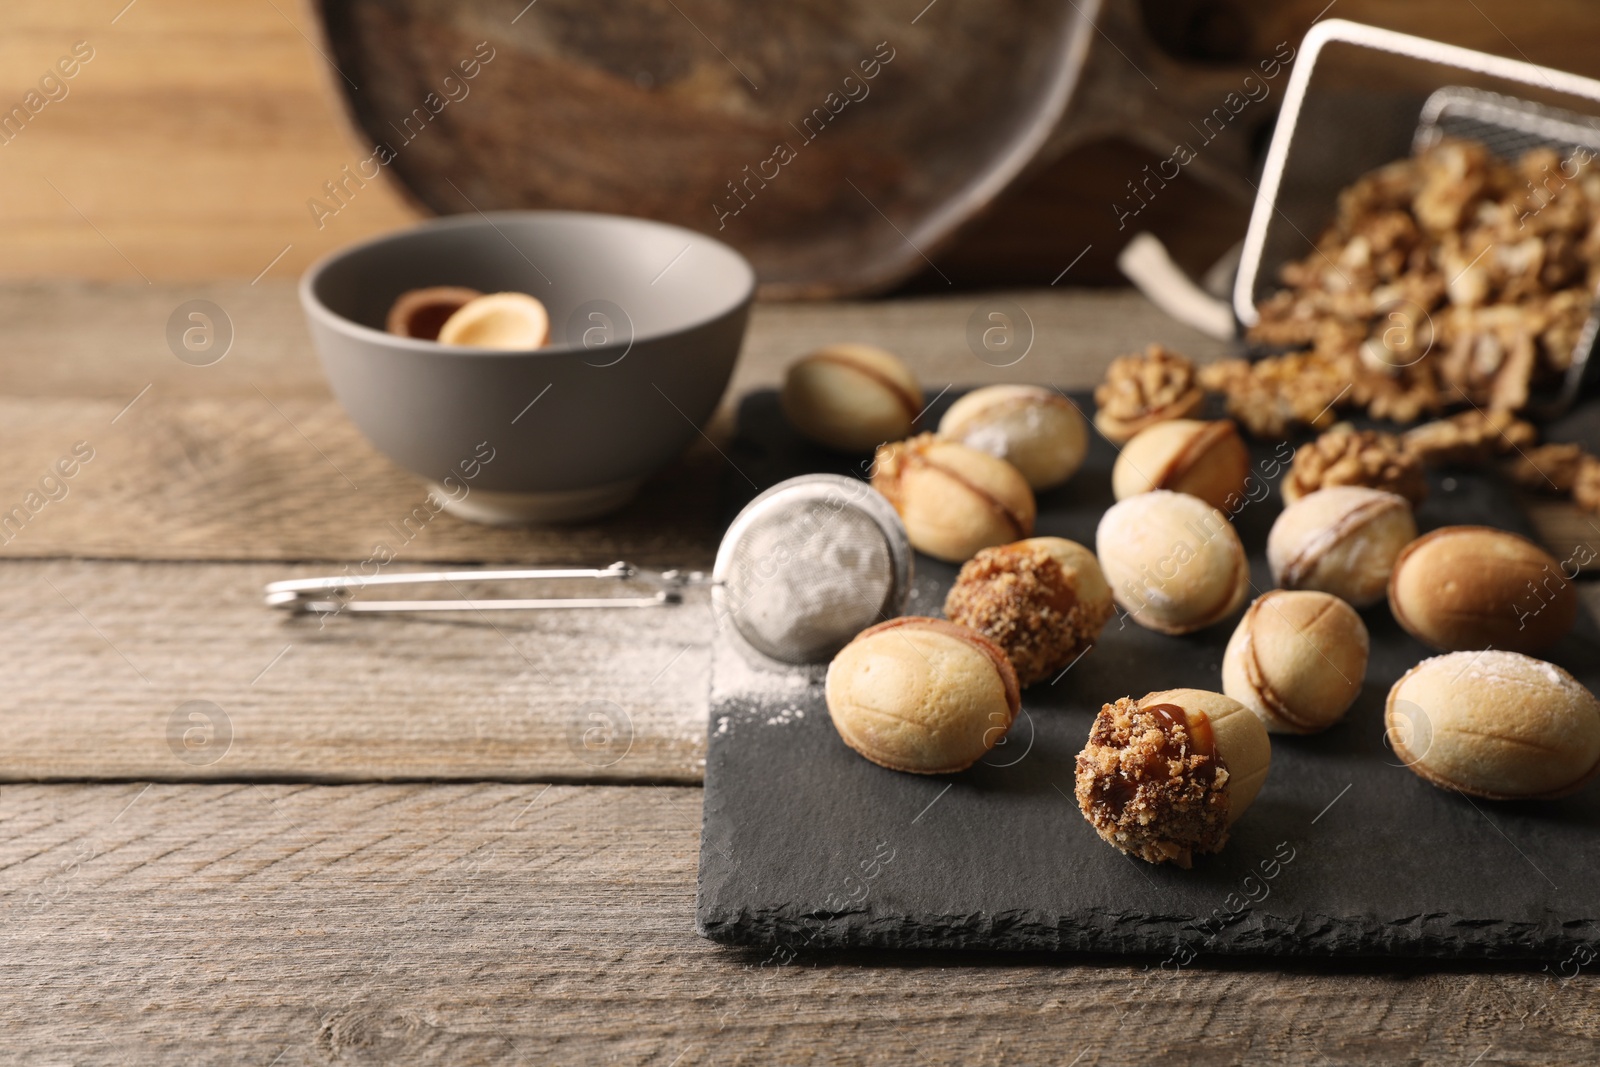 Photo of Freshly baked homemade walnut shaped cookies and flour on wooden table, space for text